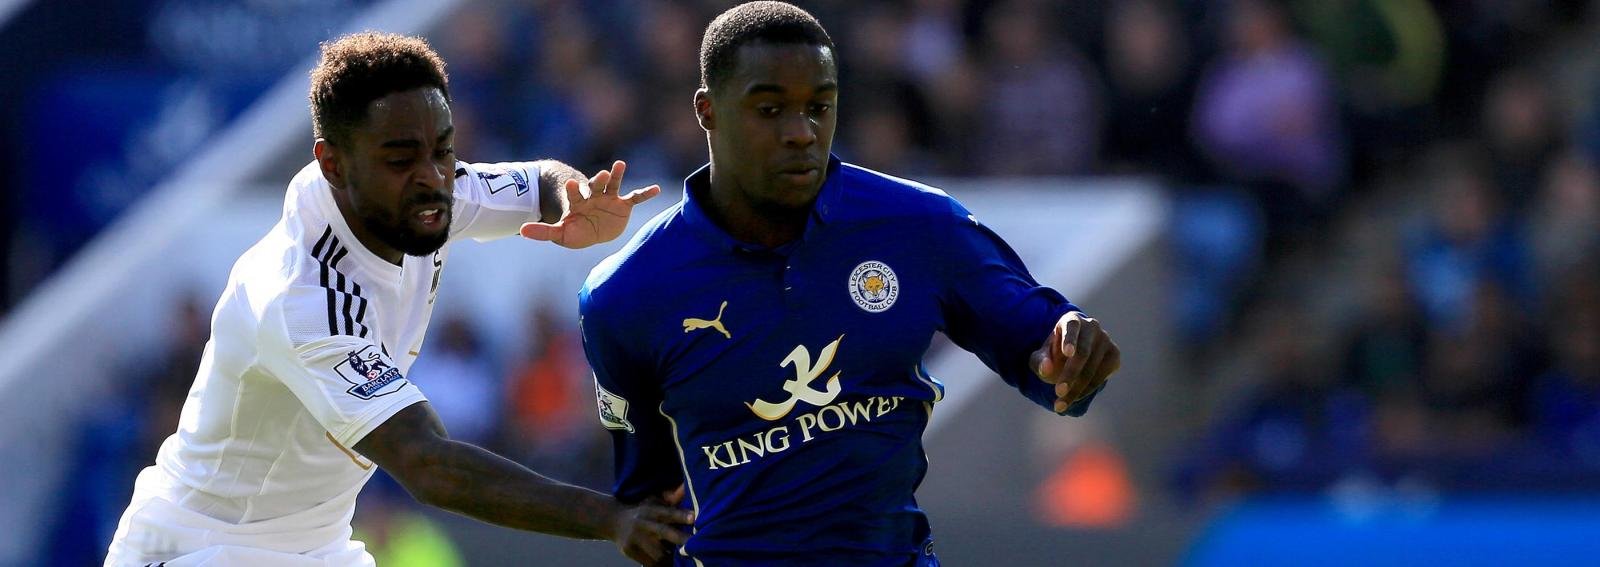 Arsenal eye £10m deal for Leicester City’s utility man